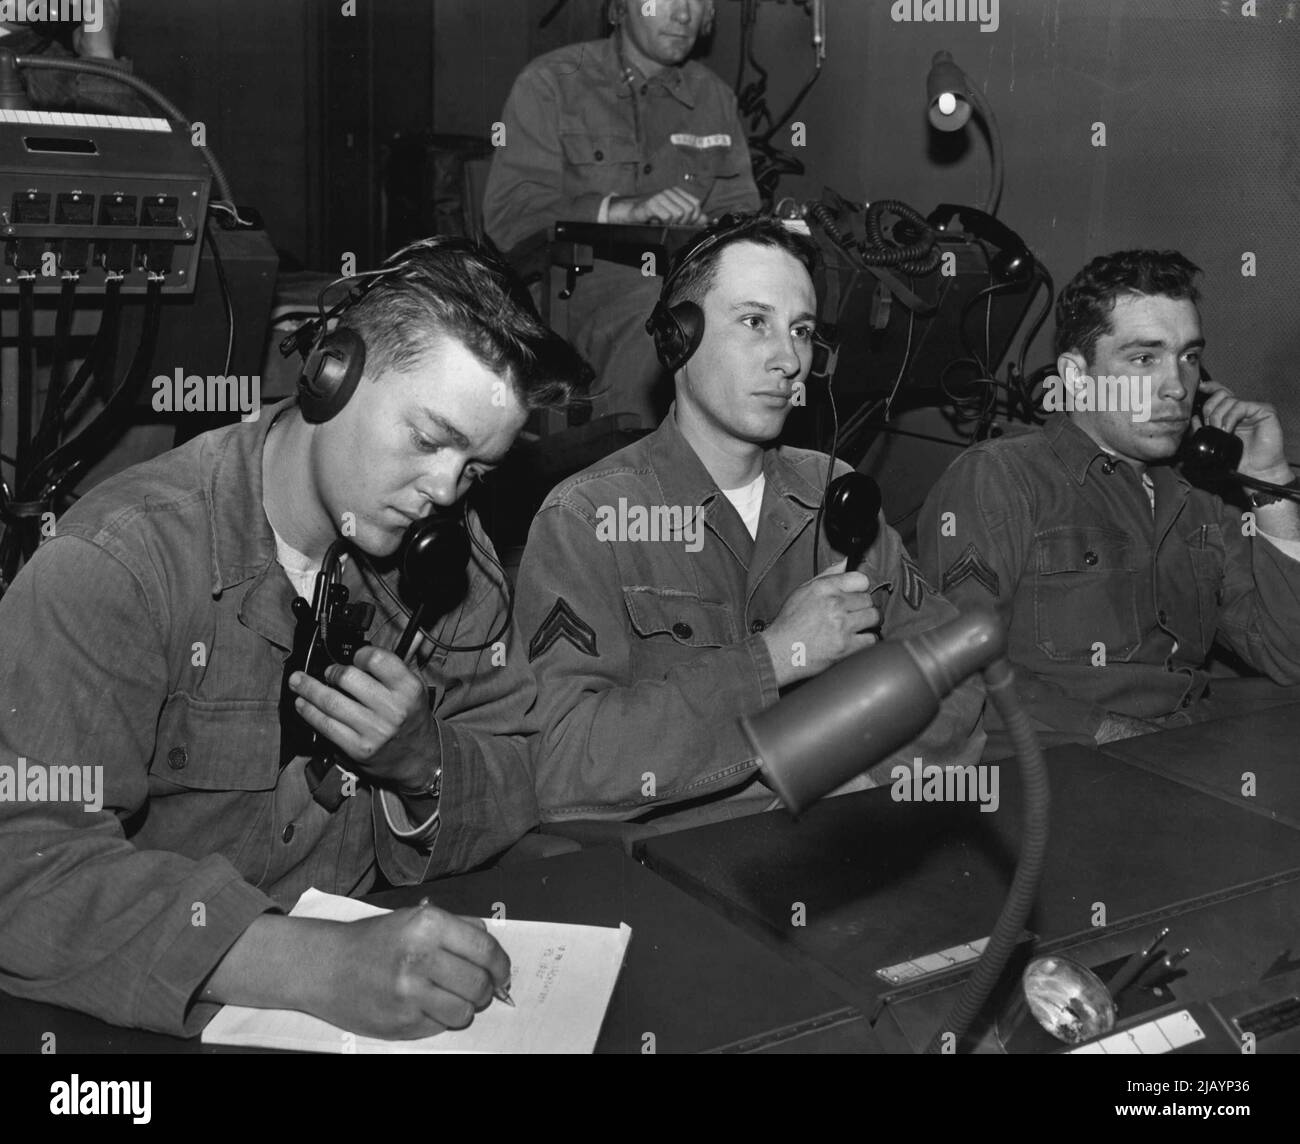 Look To The Skies -- As sky sweeper batteries go into action, technicians at an operations center, fort bliss, Texas, tabulate firing information received from units of the 531st anti aircraft artillery battalion. Shown left to right are: Pvt. Charles R. Jones, Fort Worth, Texas; Cpl. Robert Enders, flint, Michigan and Cpl. Cyril Brown, Oklahoma. December 06, 1954. (Photo by Official U.S. Army Photo). Stock Photo